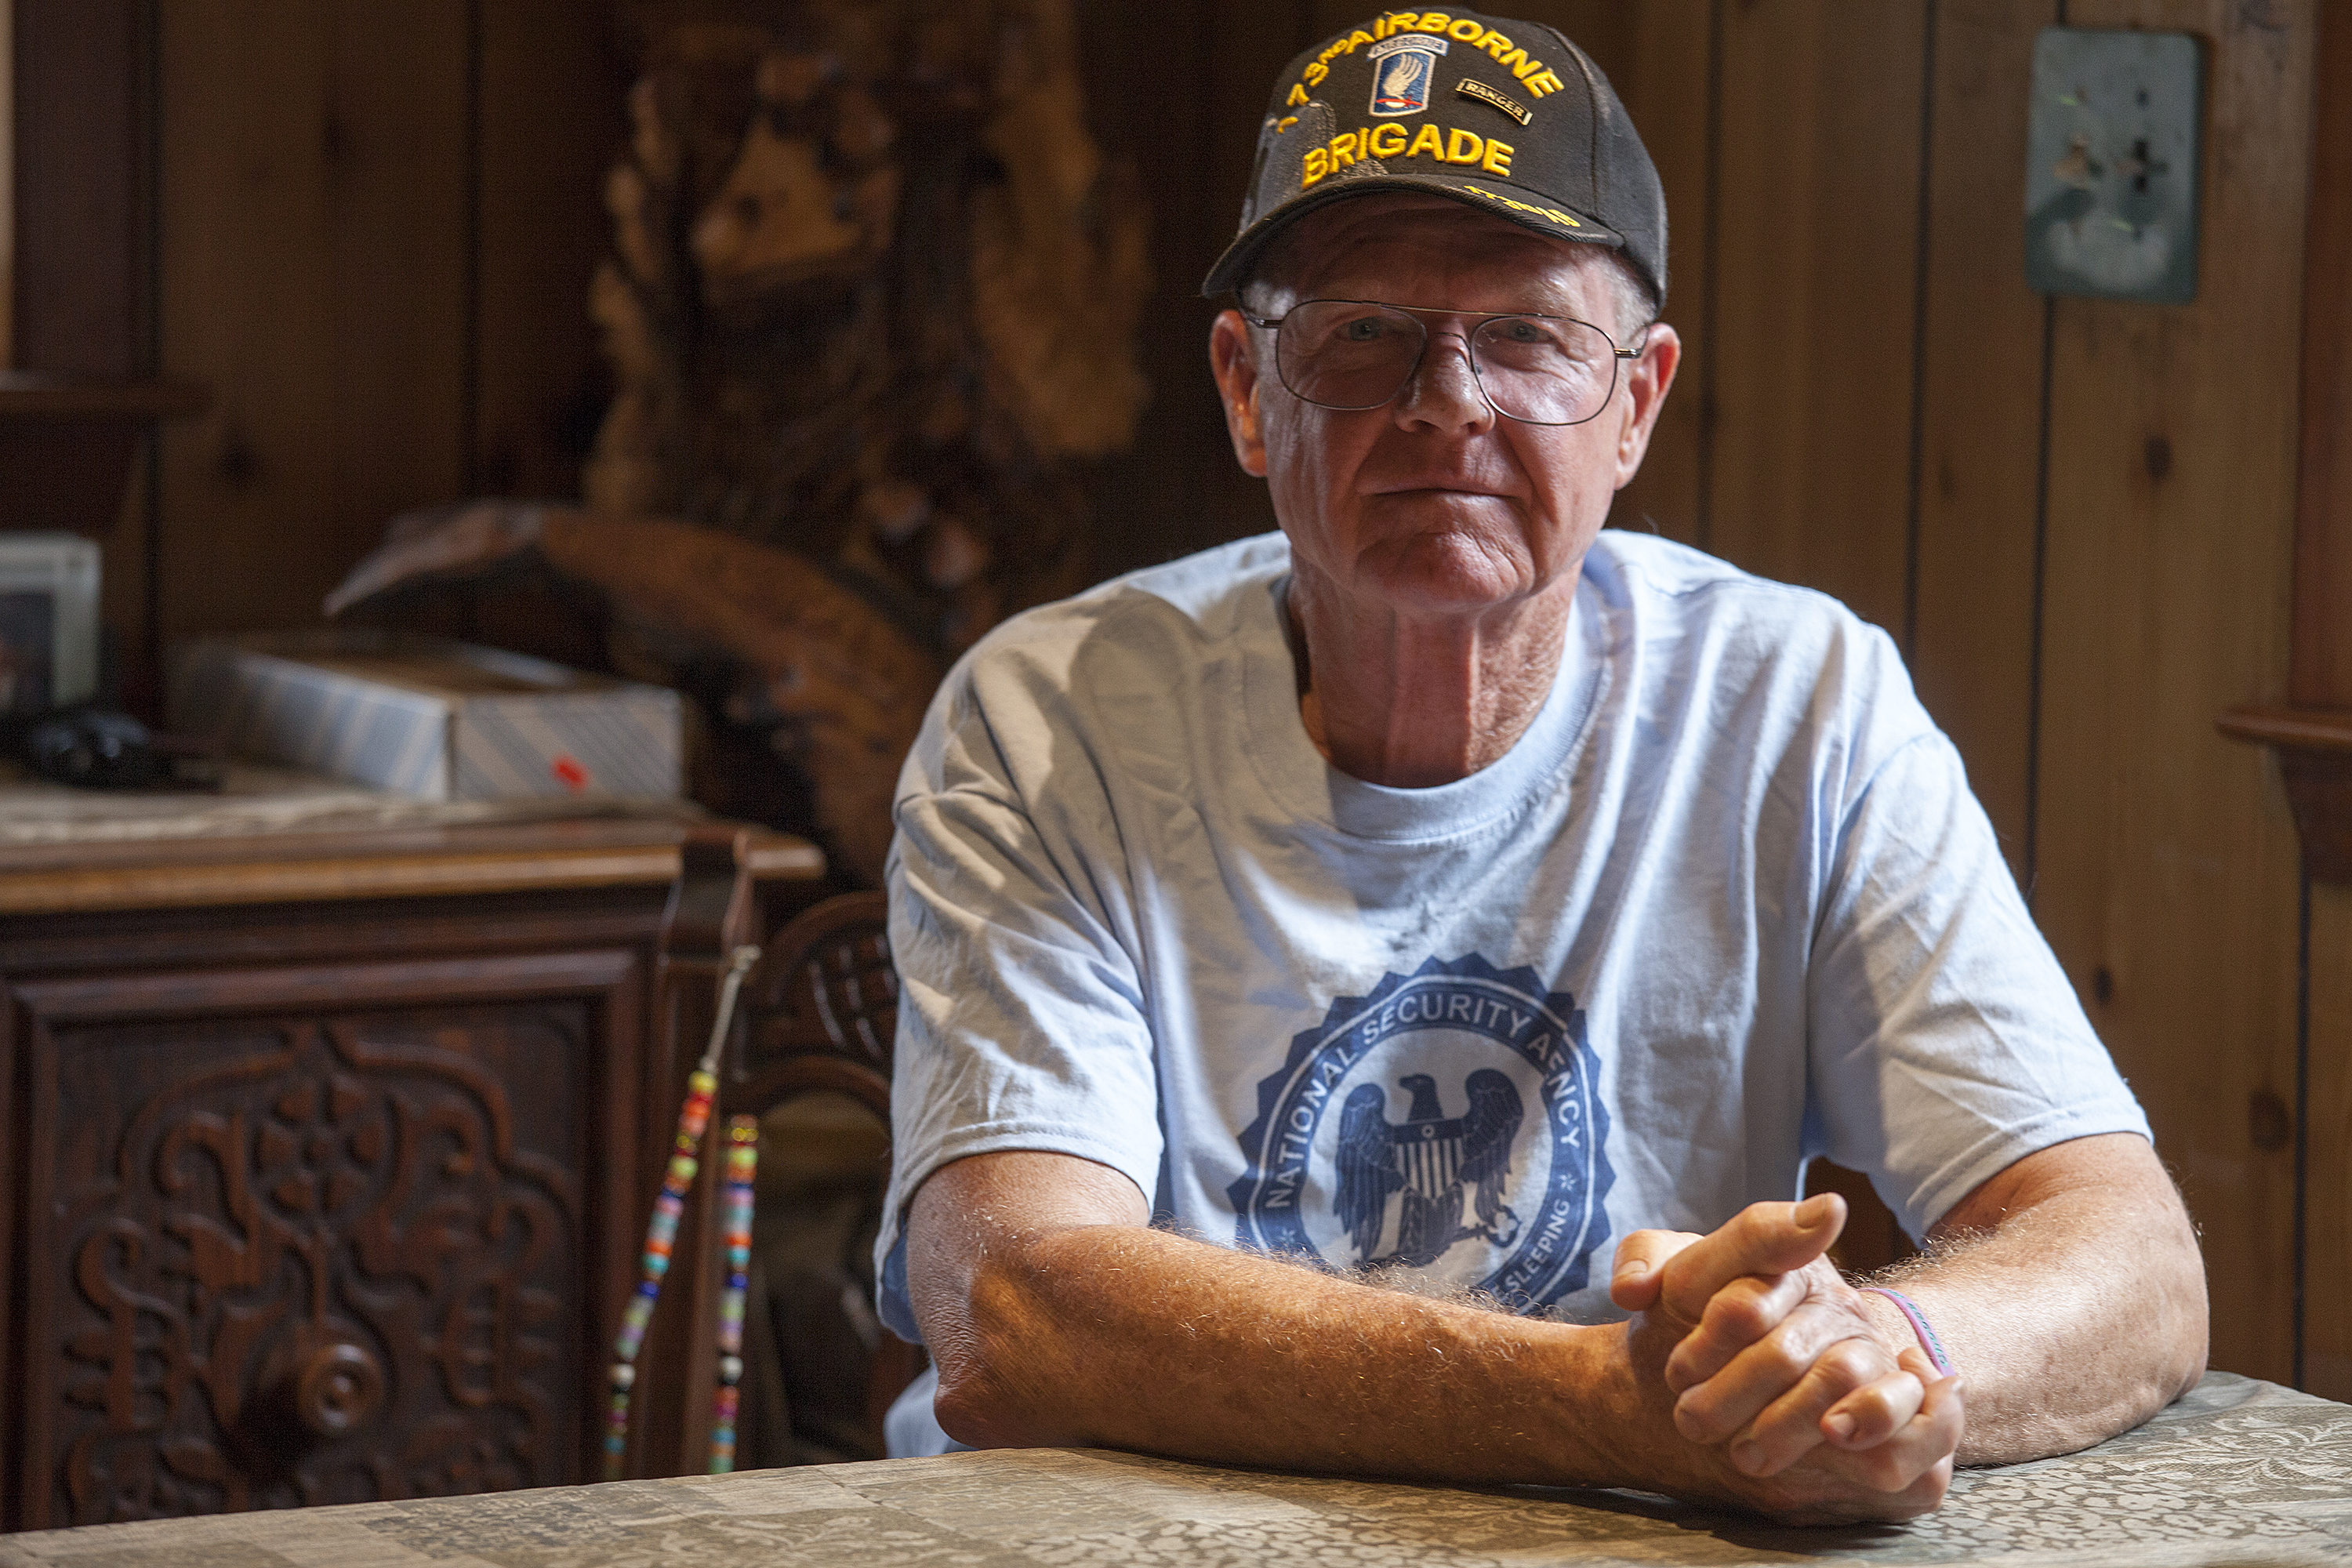 John Suter sits in his dining room in Chugiak. His appeal with the Alaska Ombudsman’s office has been ongoing for more than a decade. (Photo by Rashah McChesney, KTOO - Juneau)